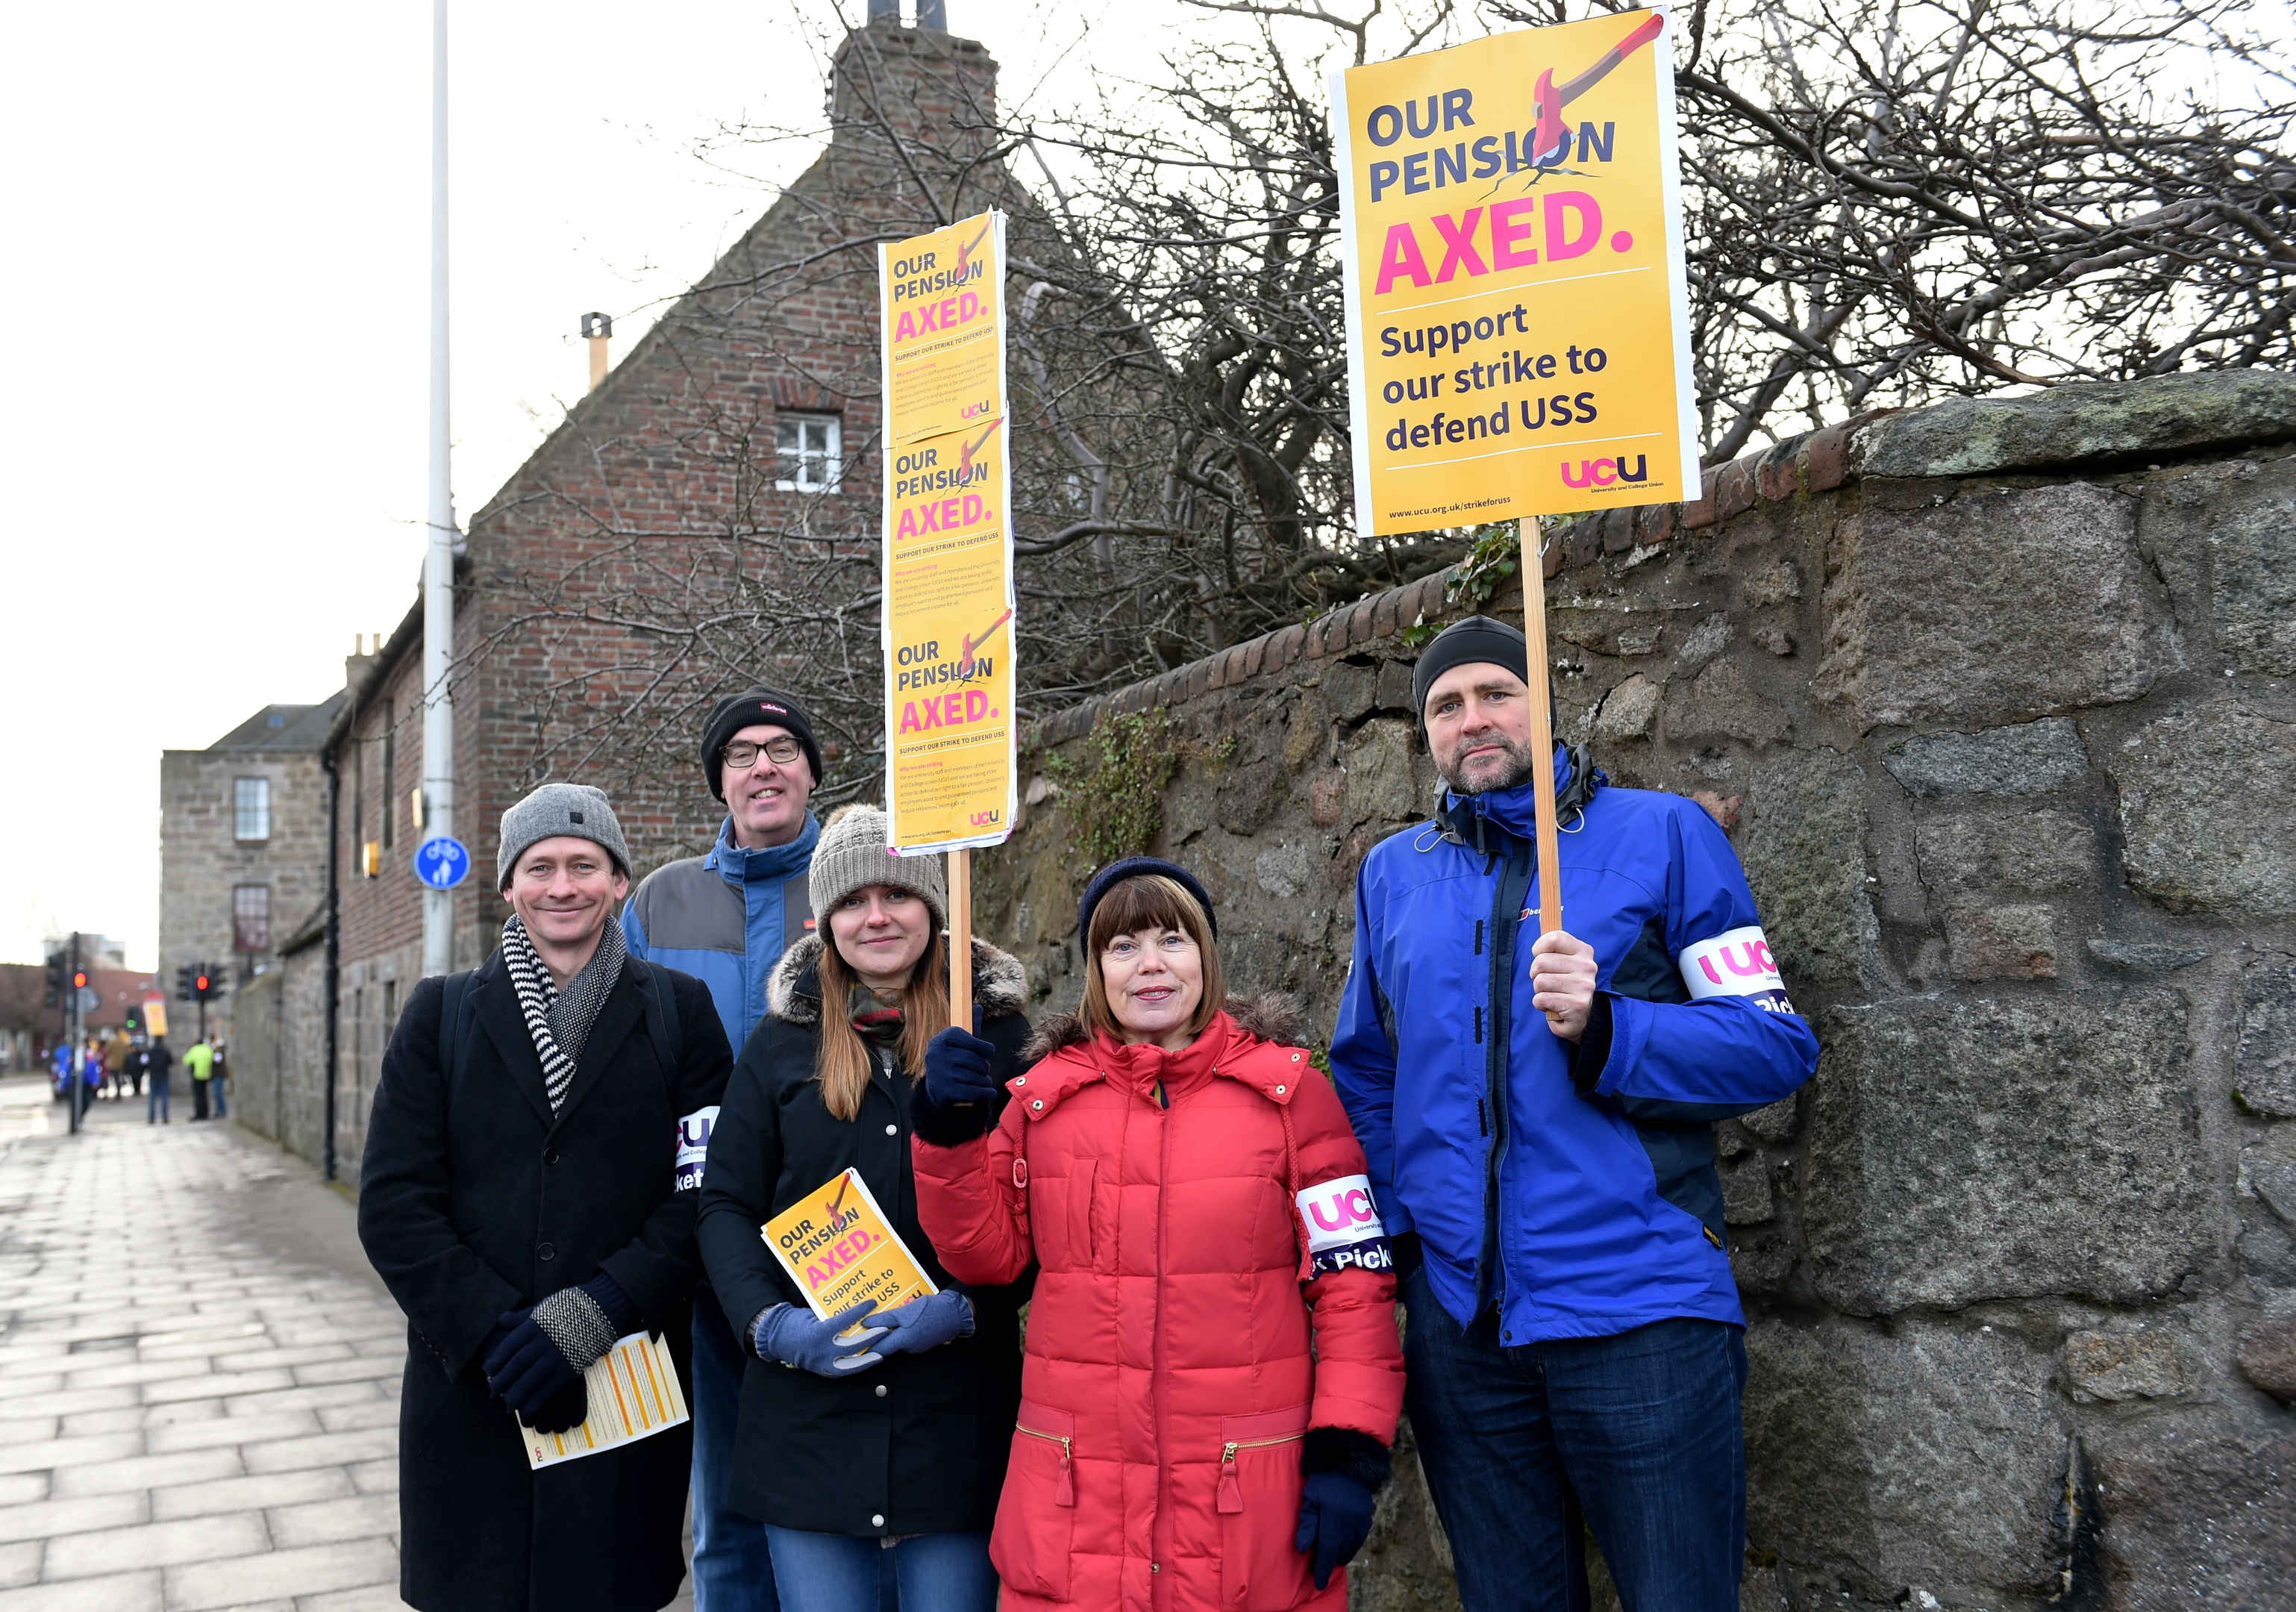 Picketers outside Aberdeen University. They are picketing over a nationwide planned pension change by Universities UK (UUK). (Darrell Benns)